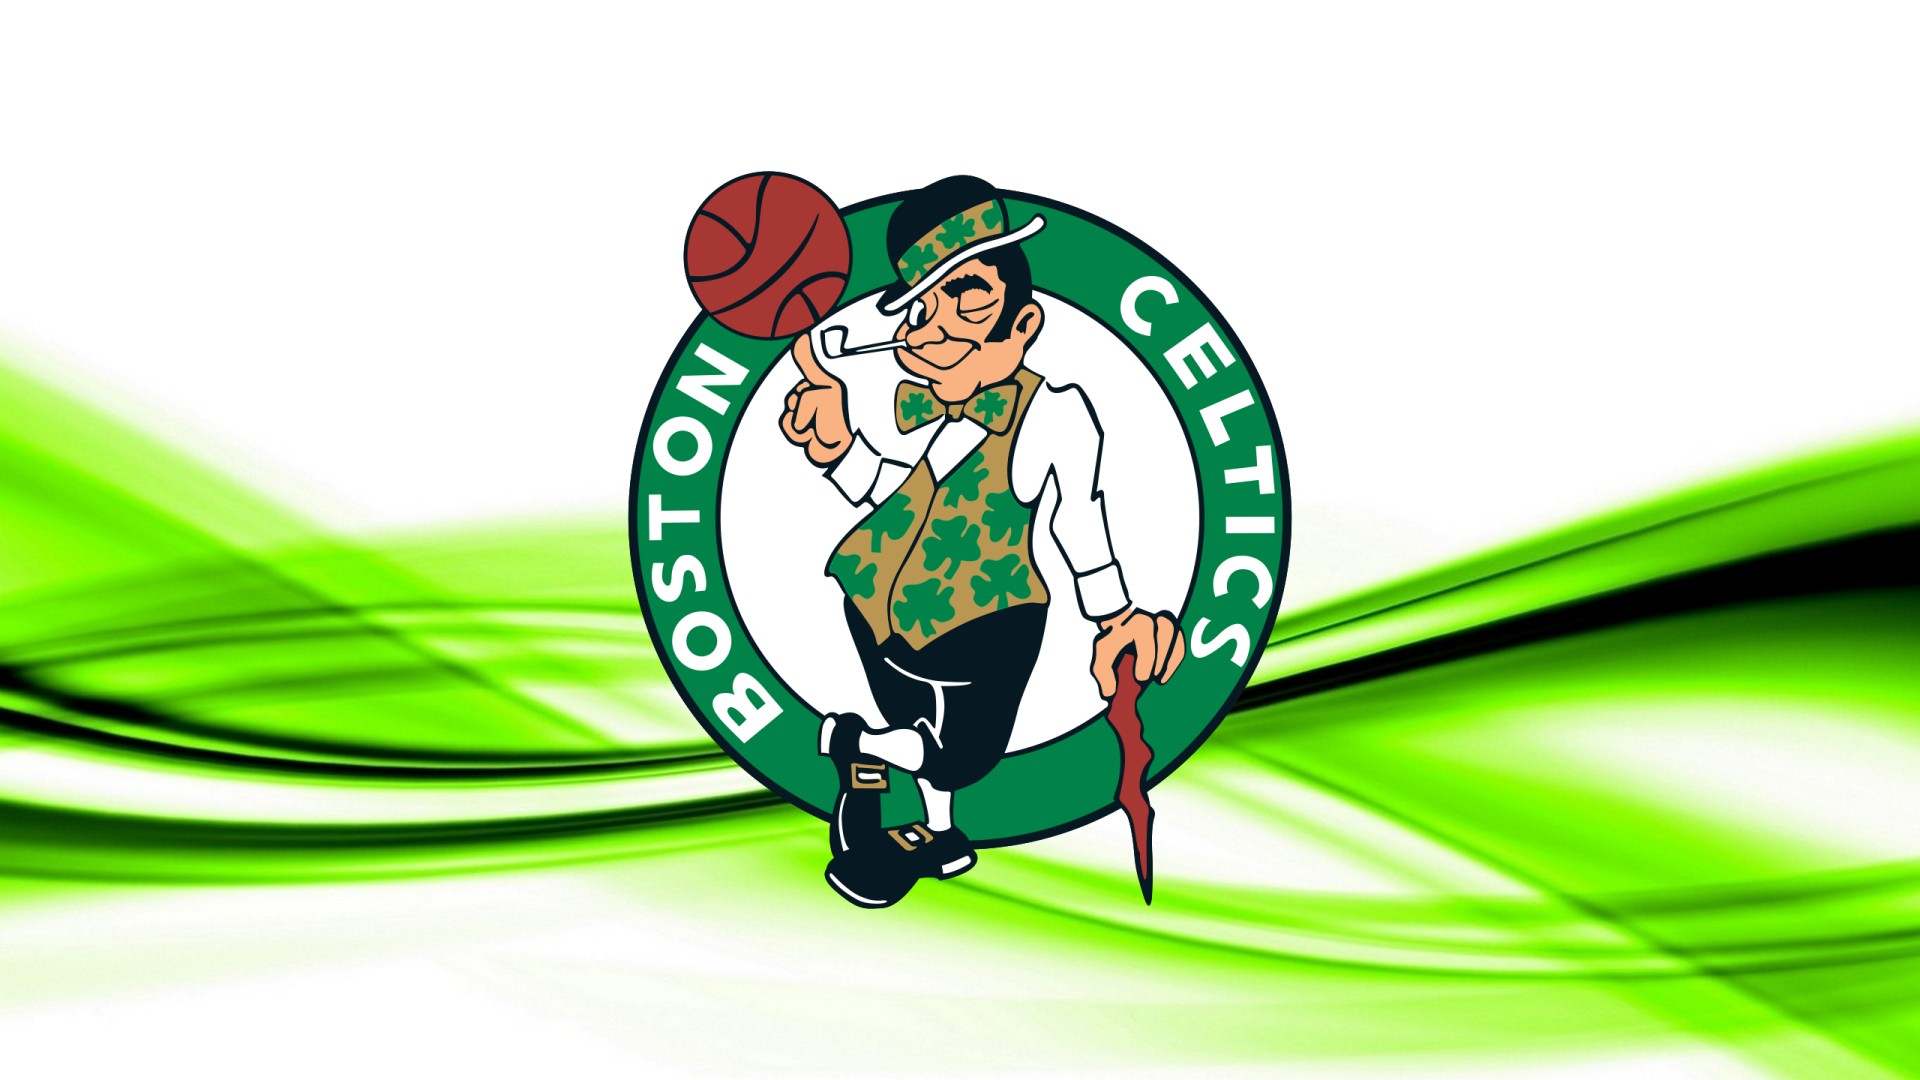 Boston Celtics Logo Mac Backgrounds with image dimensions 1920x1080 pixel. You can make this wallpaper for your Desktop Computer Backgrounds, Windows or Mac Screensavers, iPhone Lock screen, Tablet or Android and another Mobile Phone device